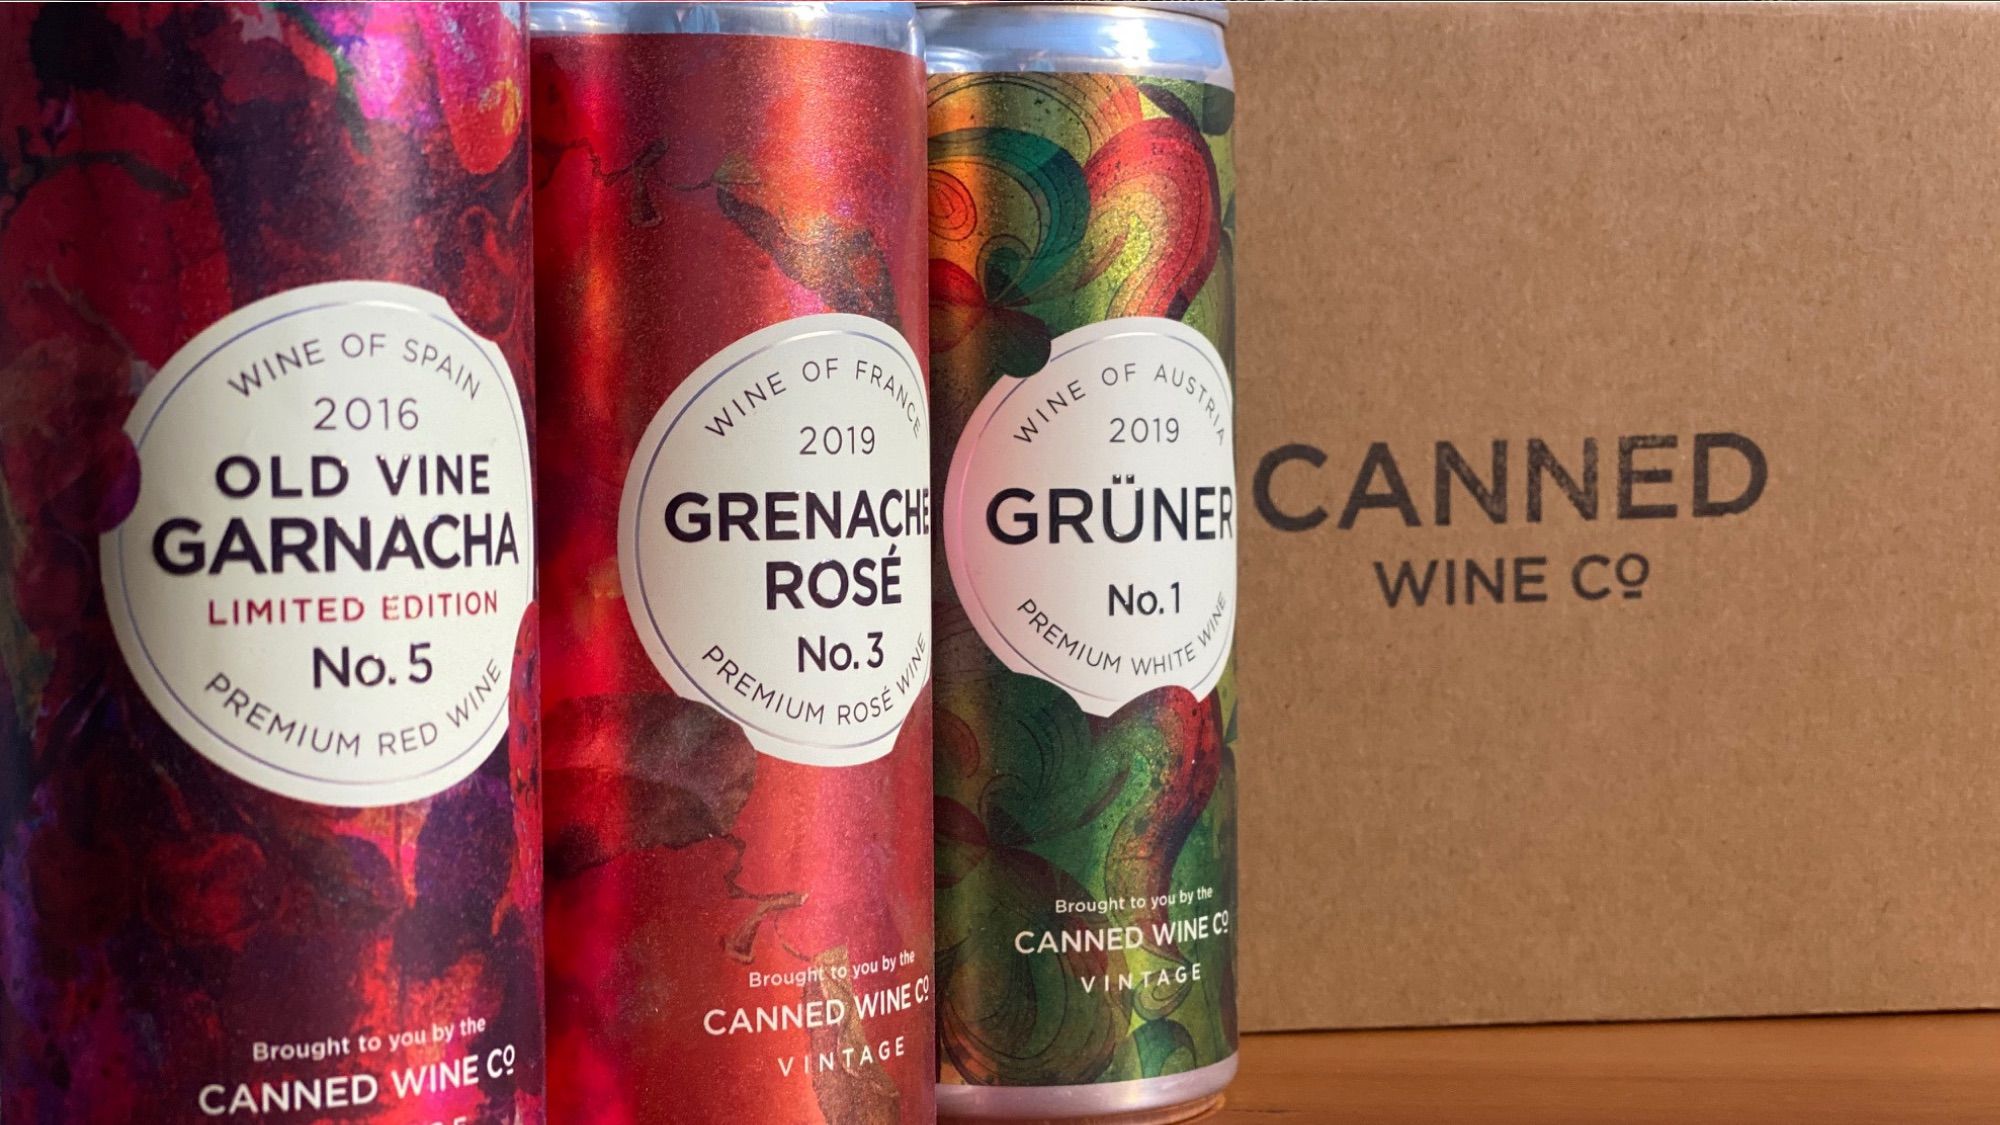 Don’t waste the moment & the trend – stick better wine in cans